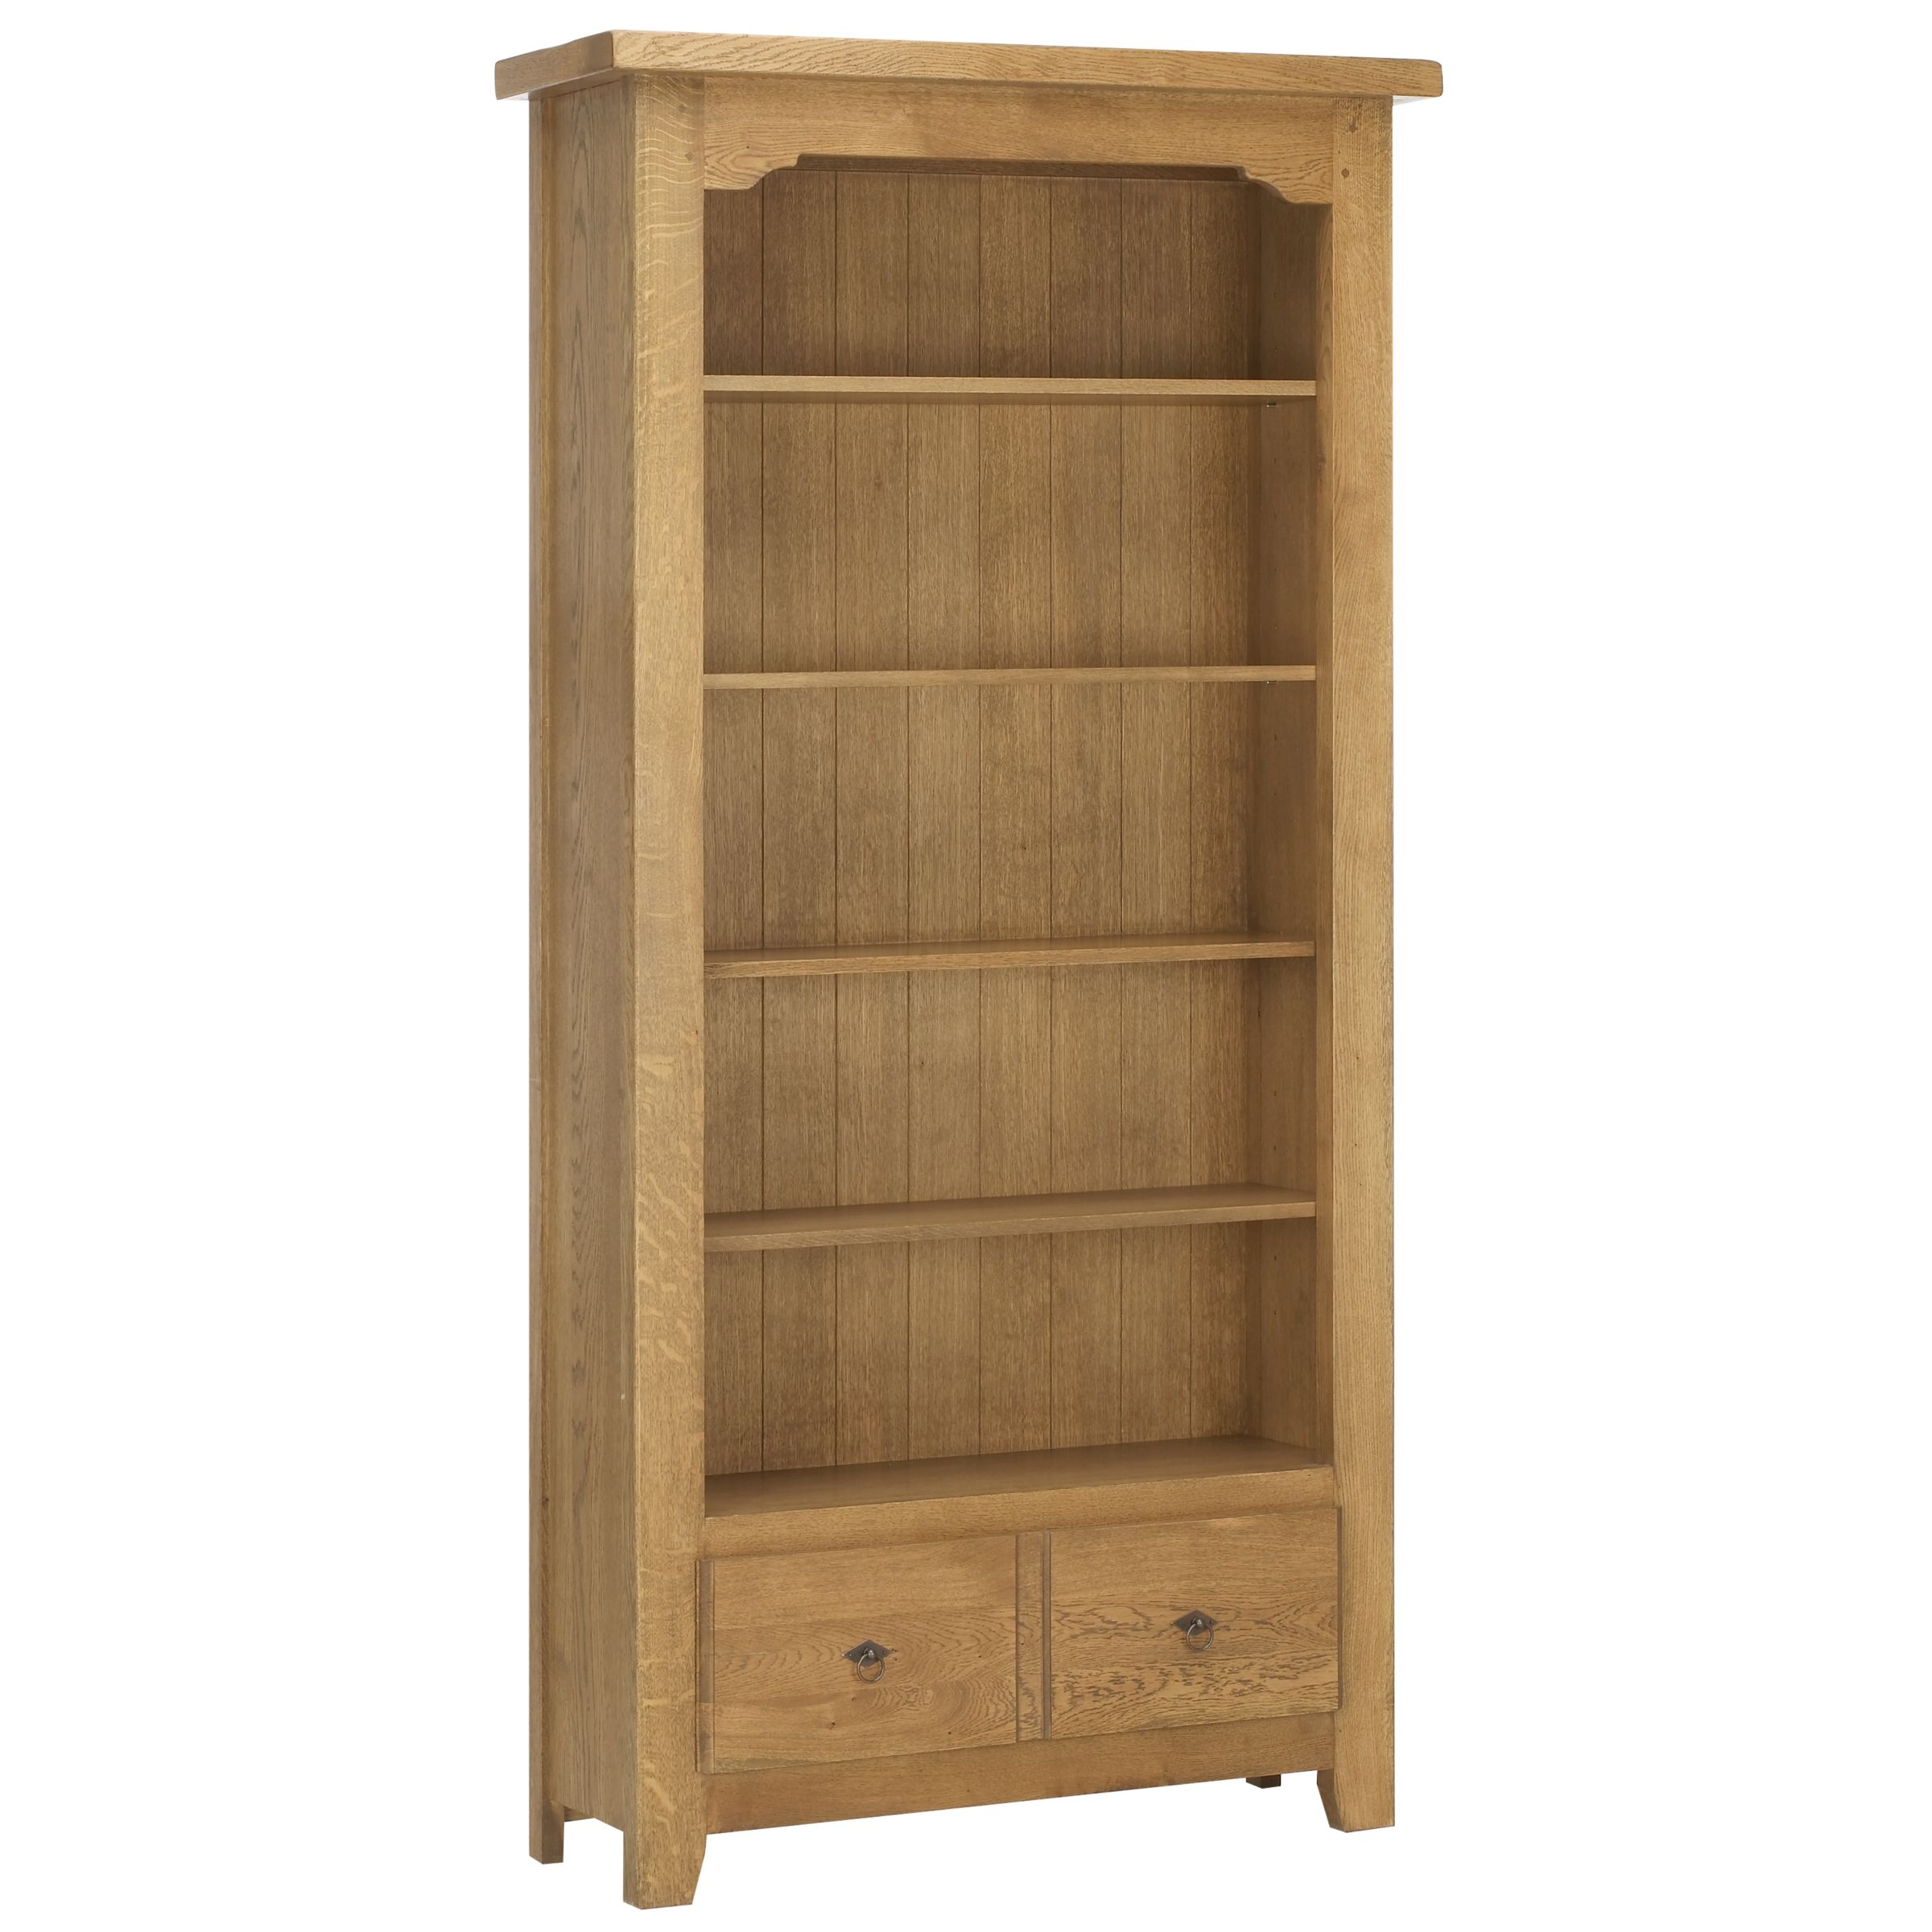 Ardennes 1 Drawer Bookcase, Cognac at John Lewis